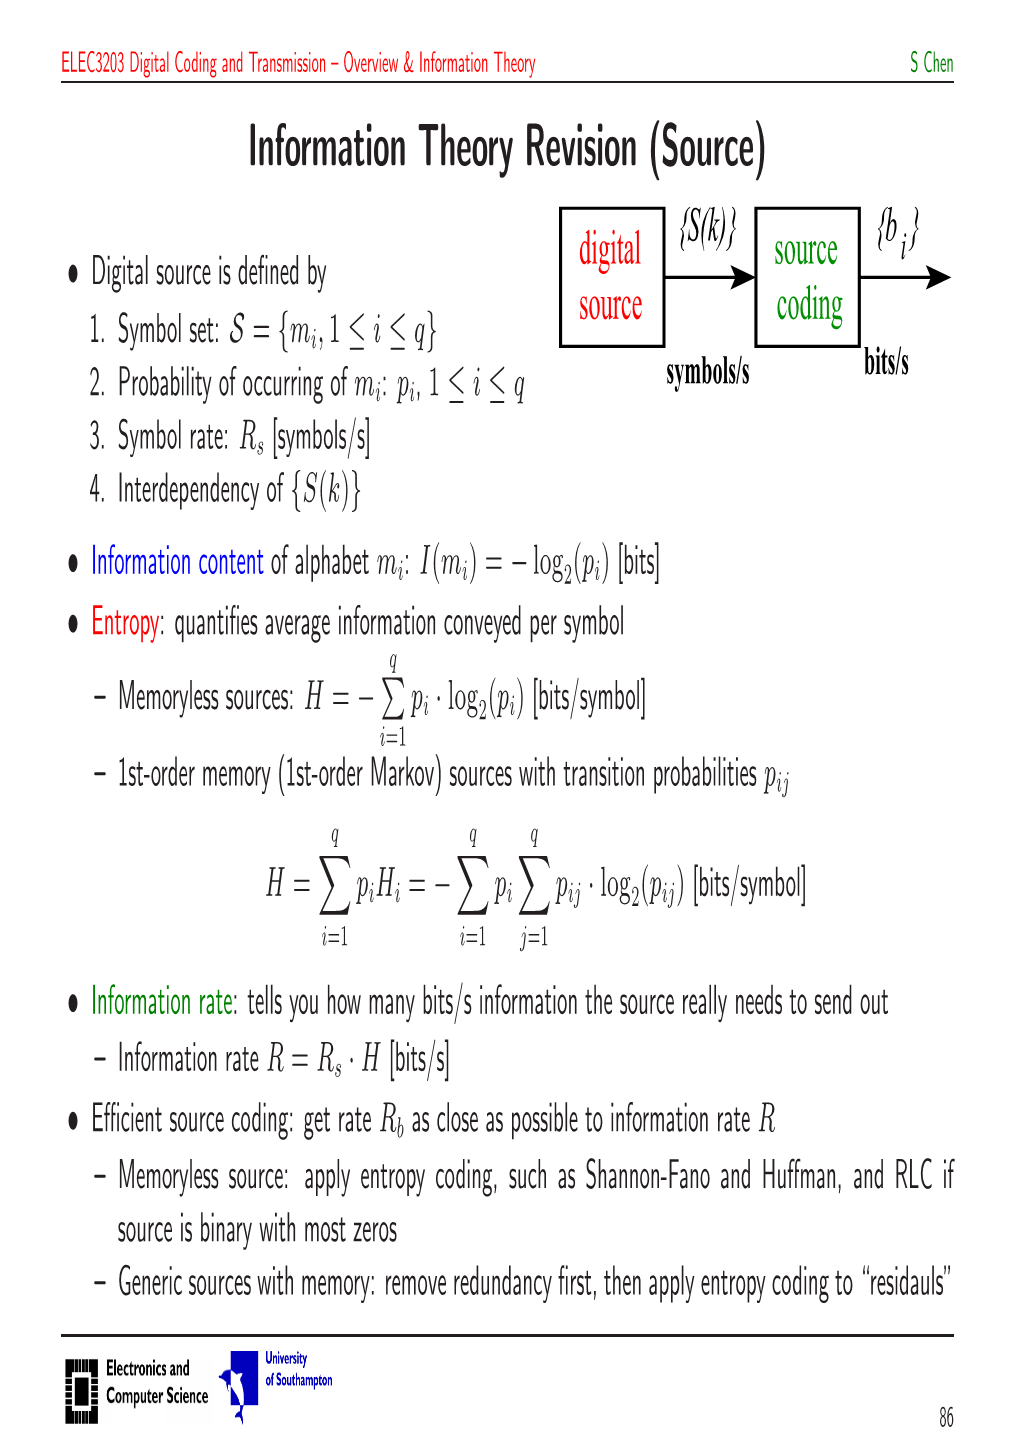 Information Theory Revision (Source)